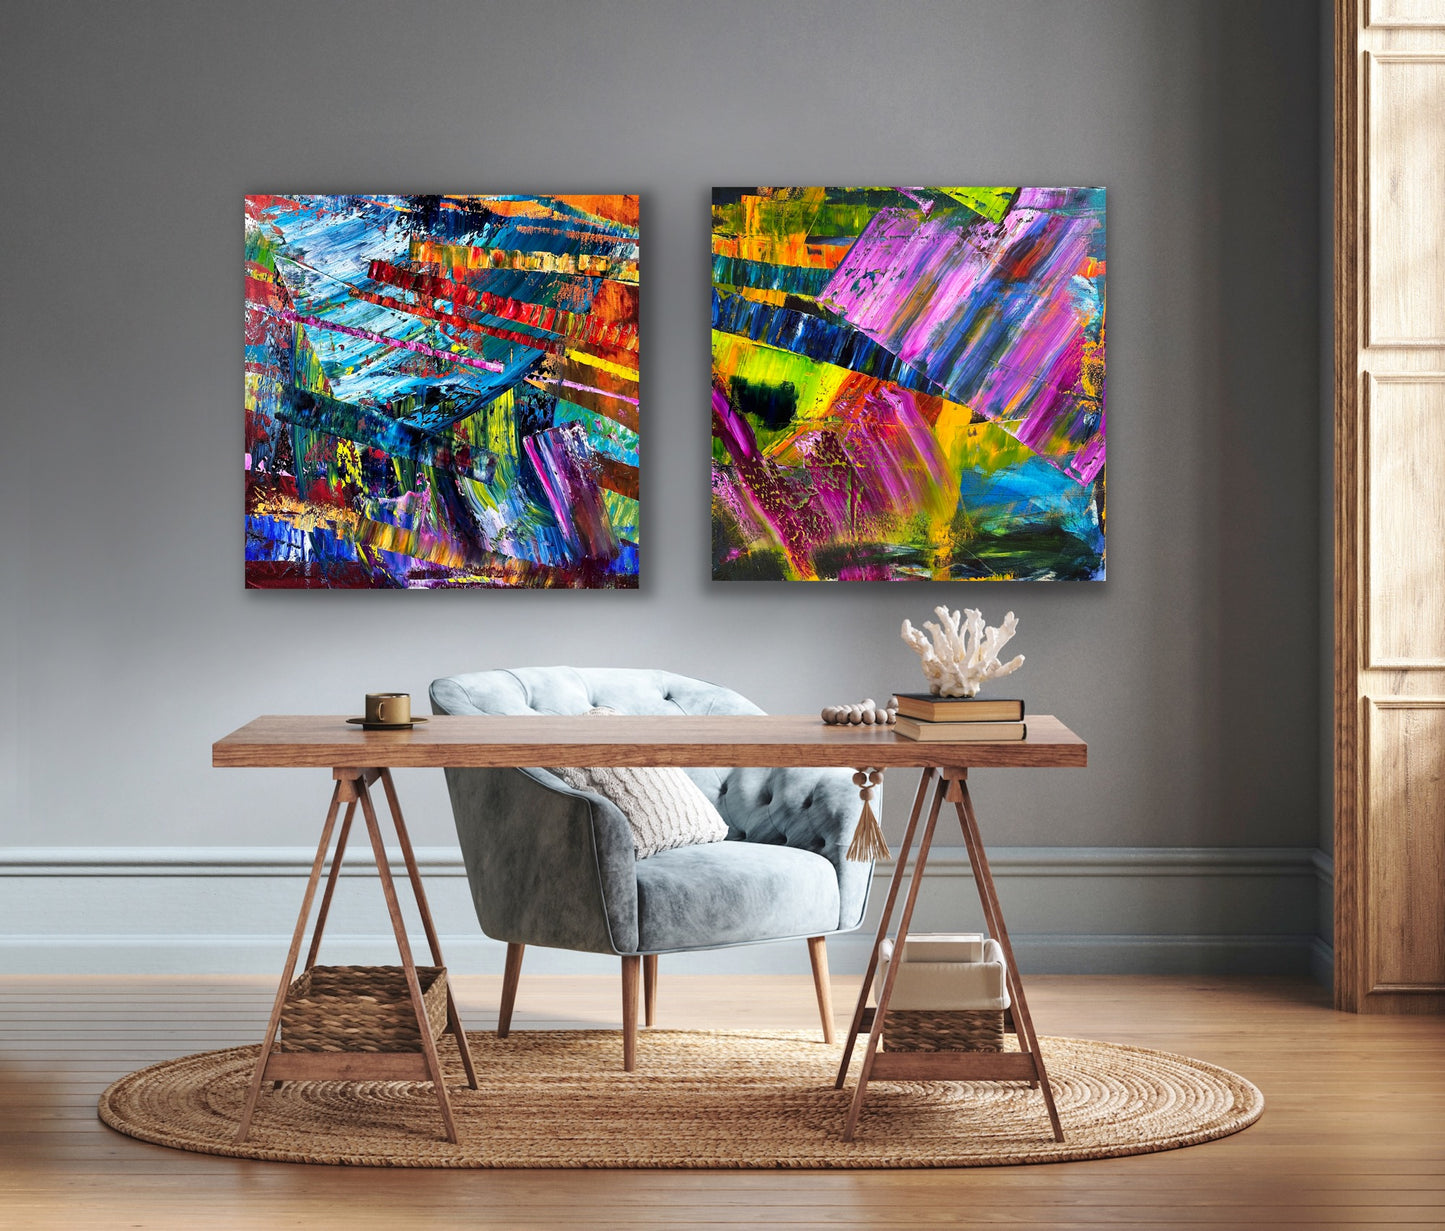 Two colorful and geometric Gerhard Richter inspired oil paintings shown in a room.